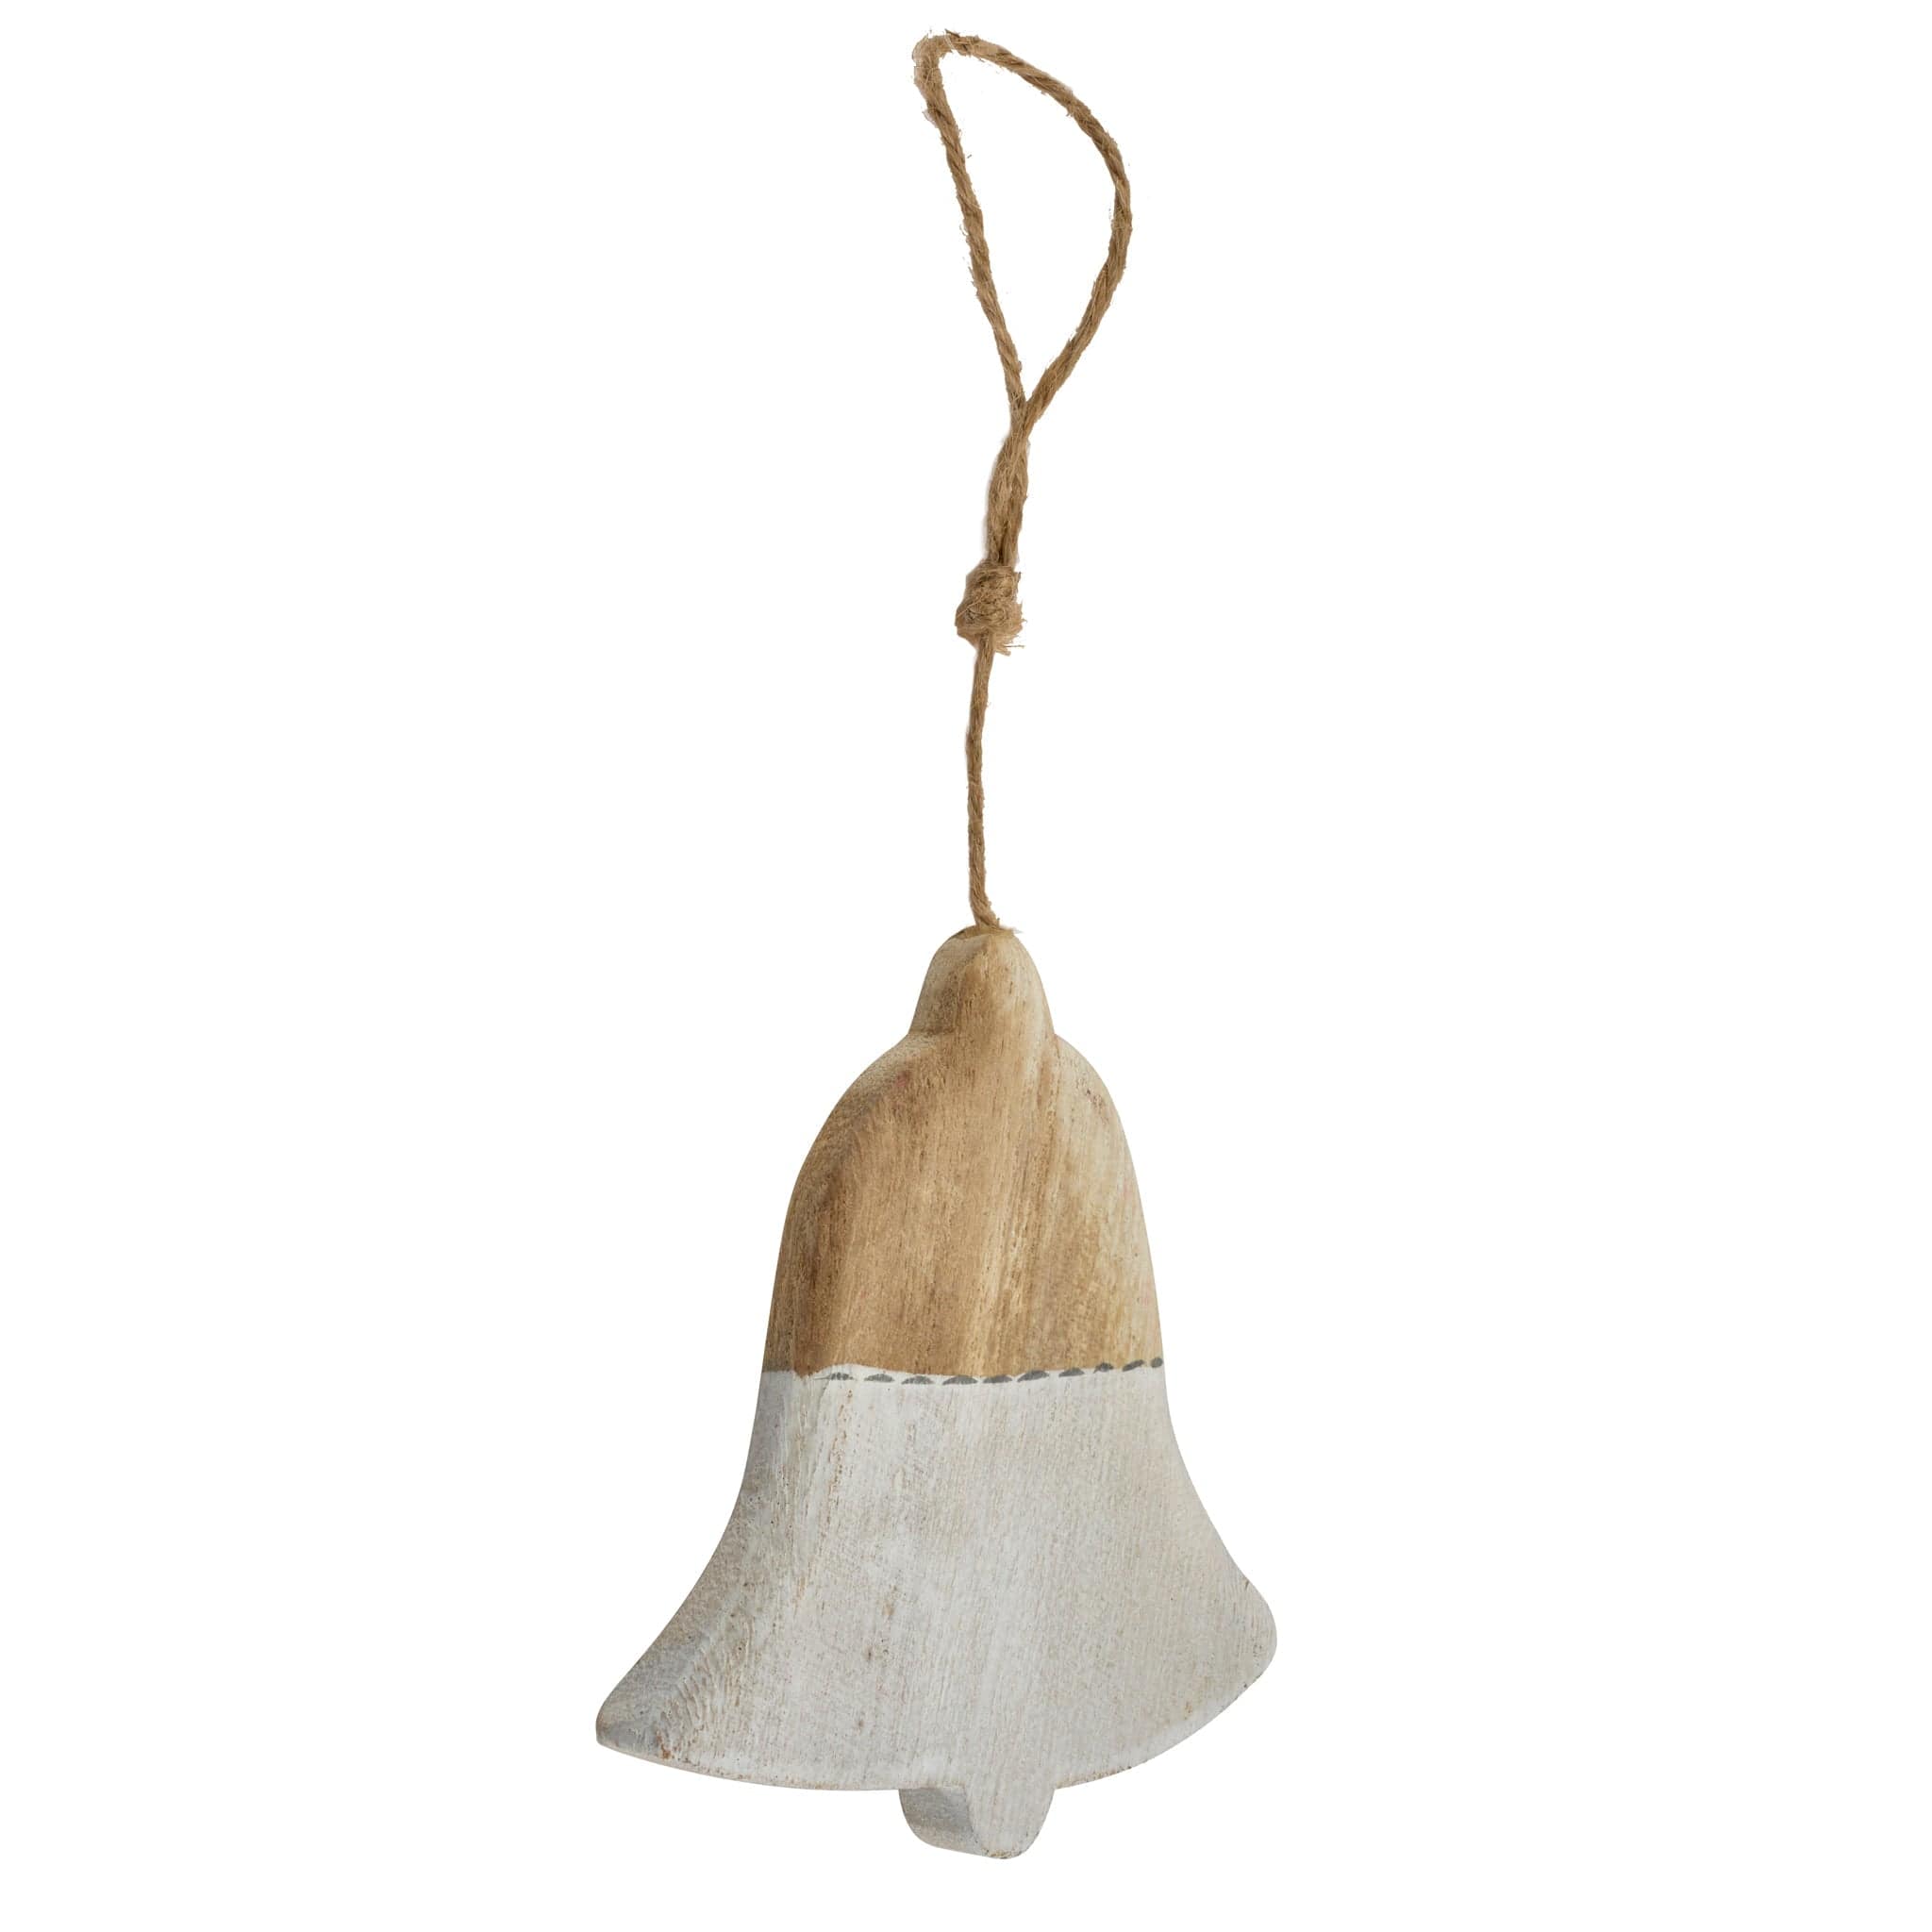 Rustic Christmas Tree Decoration - Wooden White Bell 8718885331226 only5pounds-com